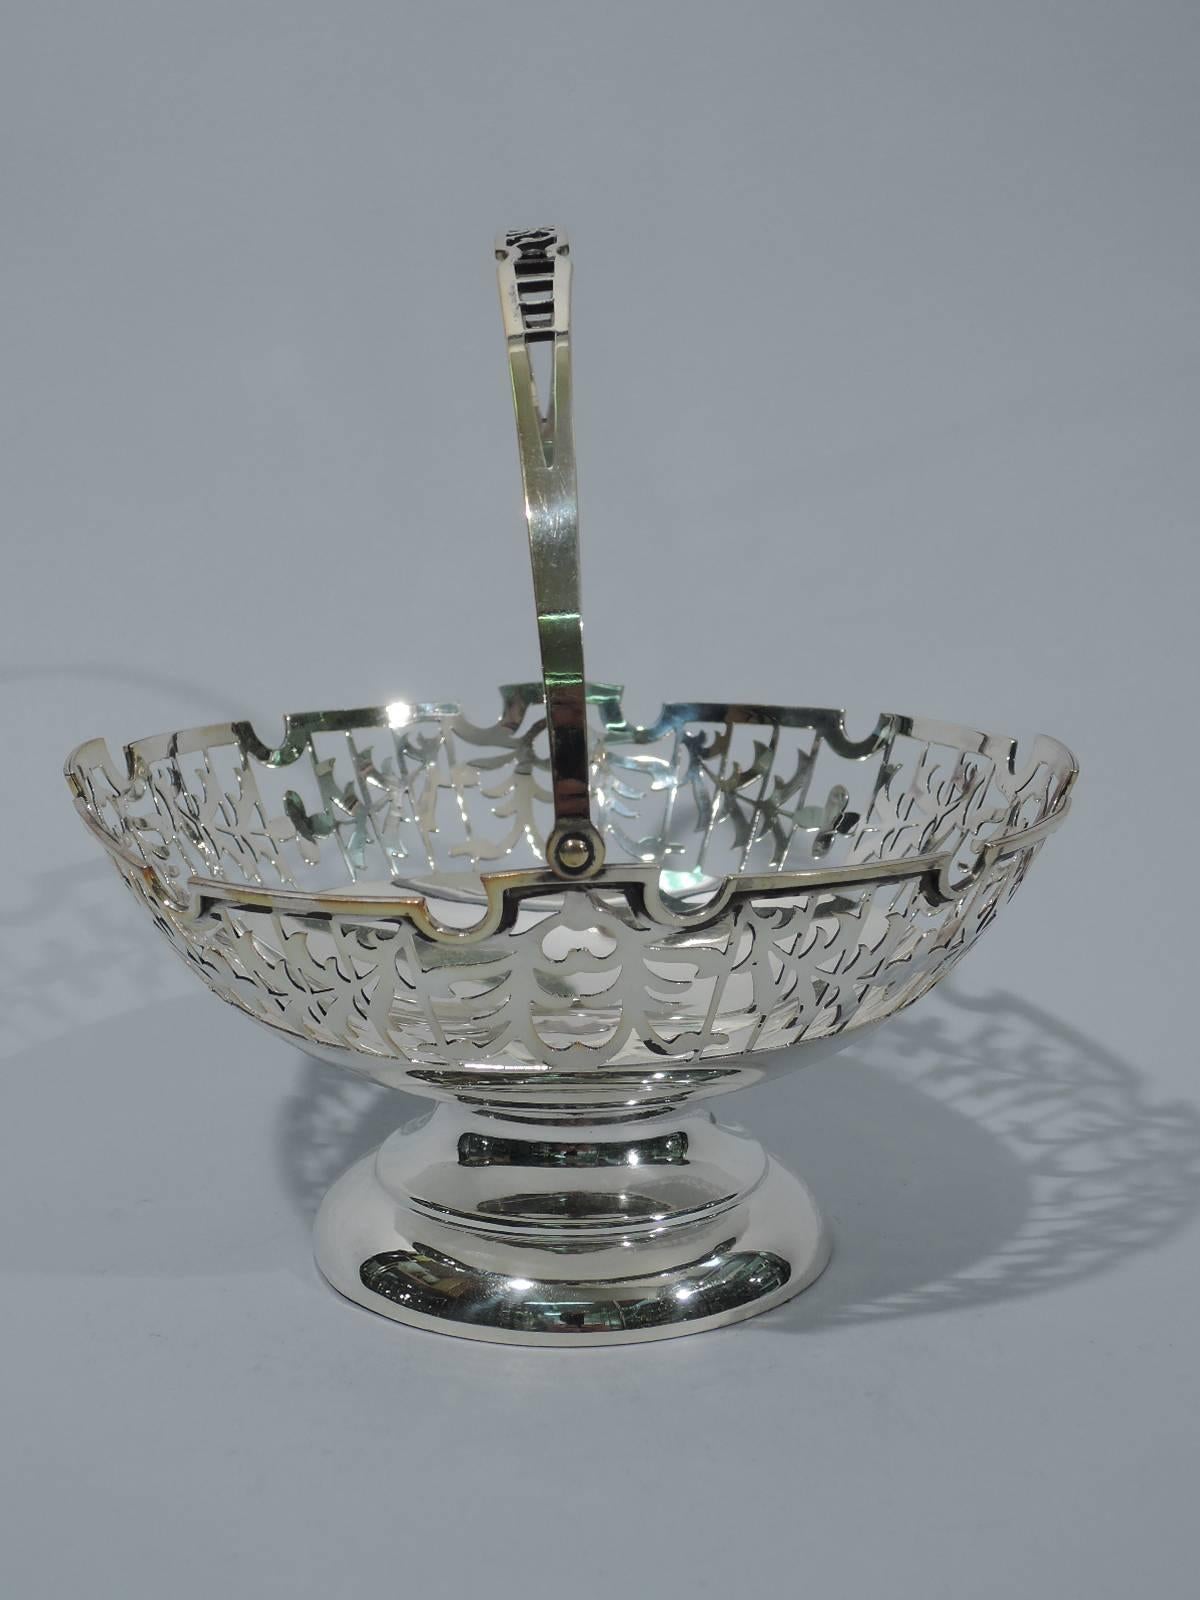 Chinese Export silver footed basket, circa 1910. Solid well and open sides with garland on trellis. C-scroll swing handle with same. Molded curvilinear rim. Short concave stem and stepped foot. Hallmarked with Chinese characters.

Dimensions: H